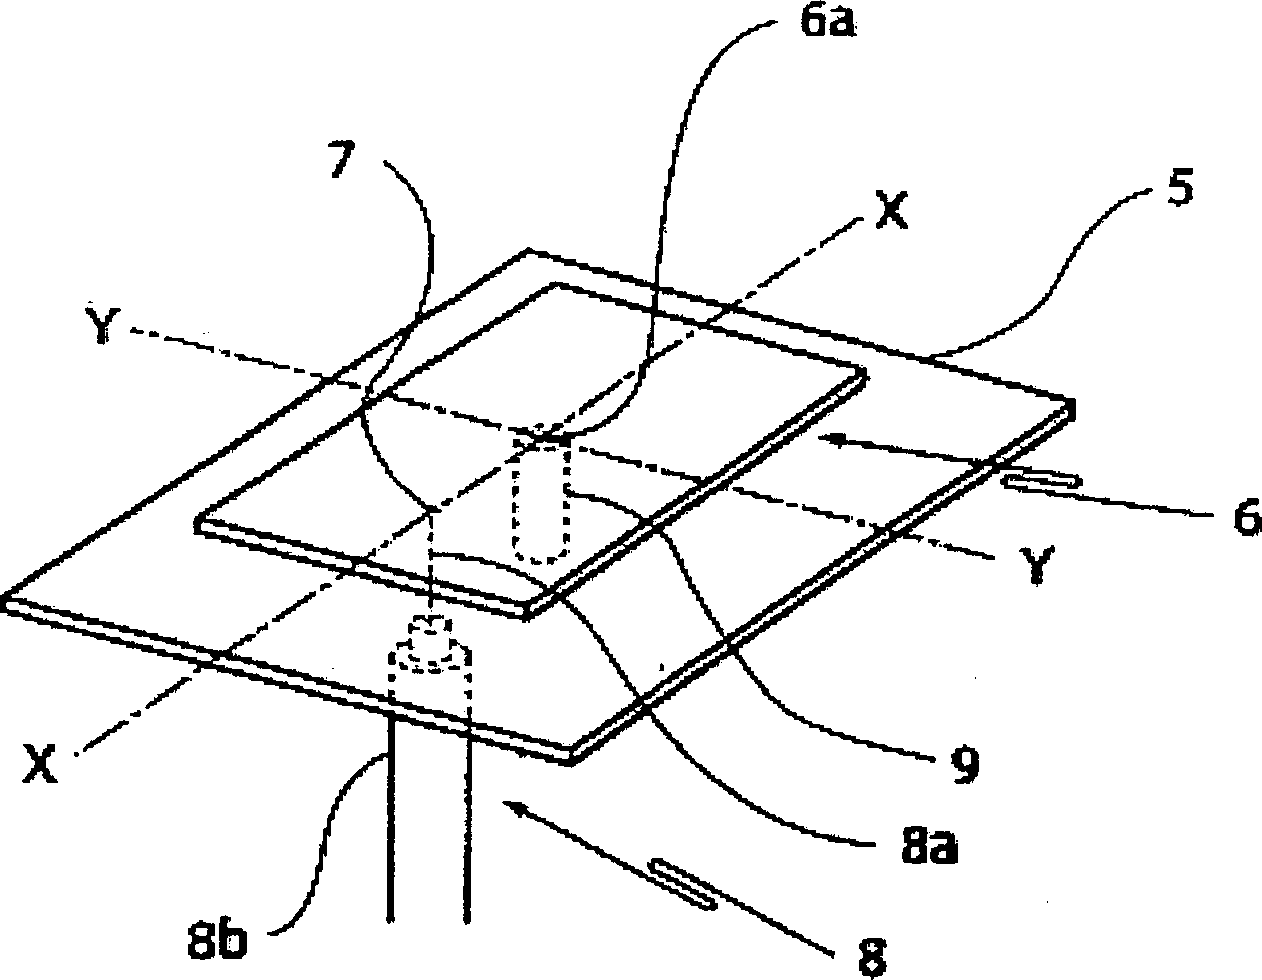 Gap butterfly antenna with passive device